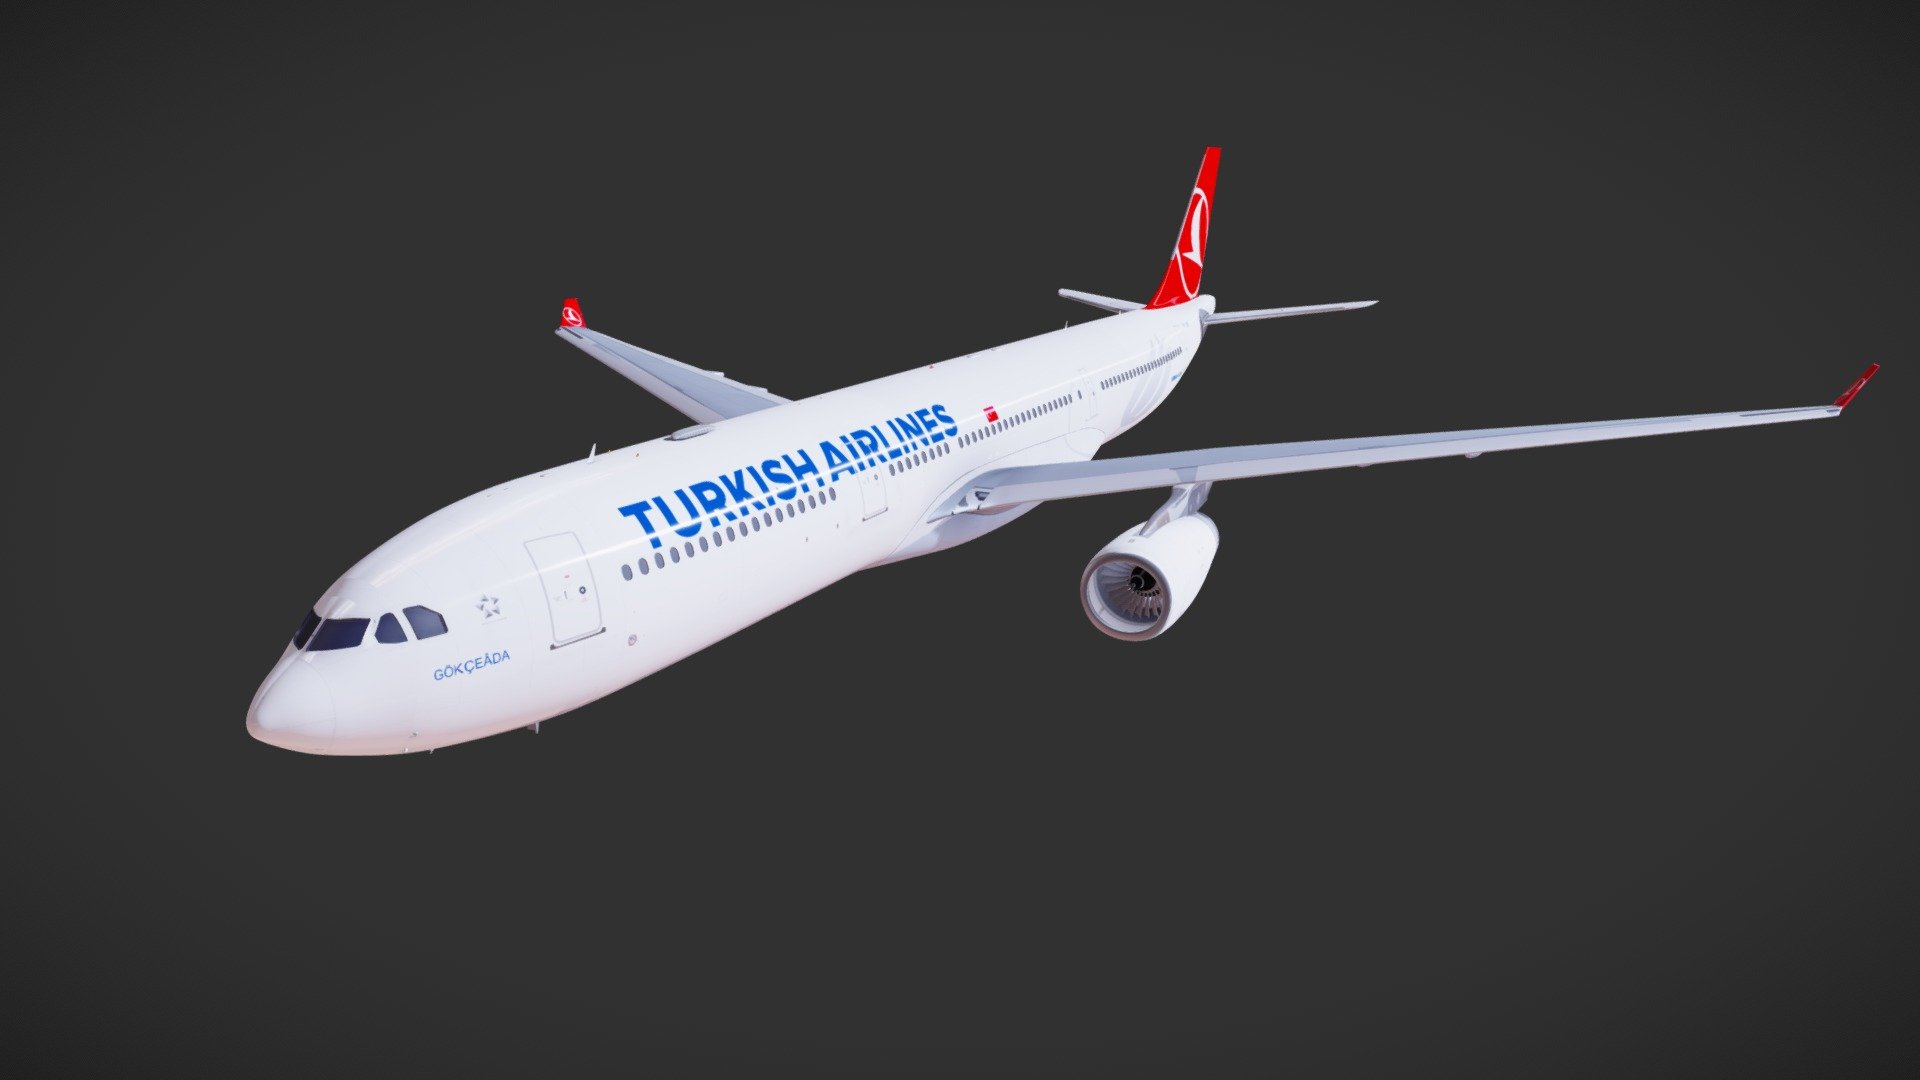 Airbus A330-343.

Rolls Royce Trent 700 Engines.

Flight Control Surfaces and Gears are Seperate Meshes.

Textures from Inibuilds.
UVs were made to be compatible with Liveries for the Aerosoft A330 Professional.

Uploaded using the Turkish Airlines Livery.

Potentially for Flight Simulator 2020 (Model not textures).

Model is 100% by me.
Livery is not mine 3d model